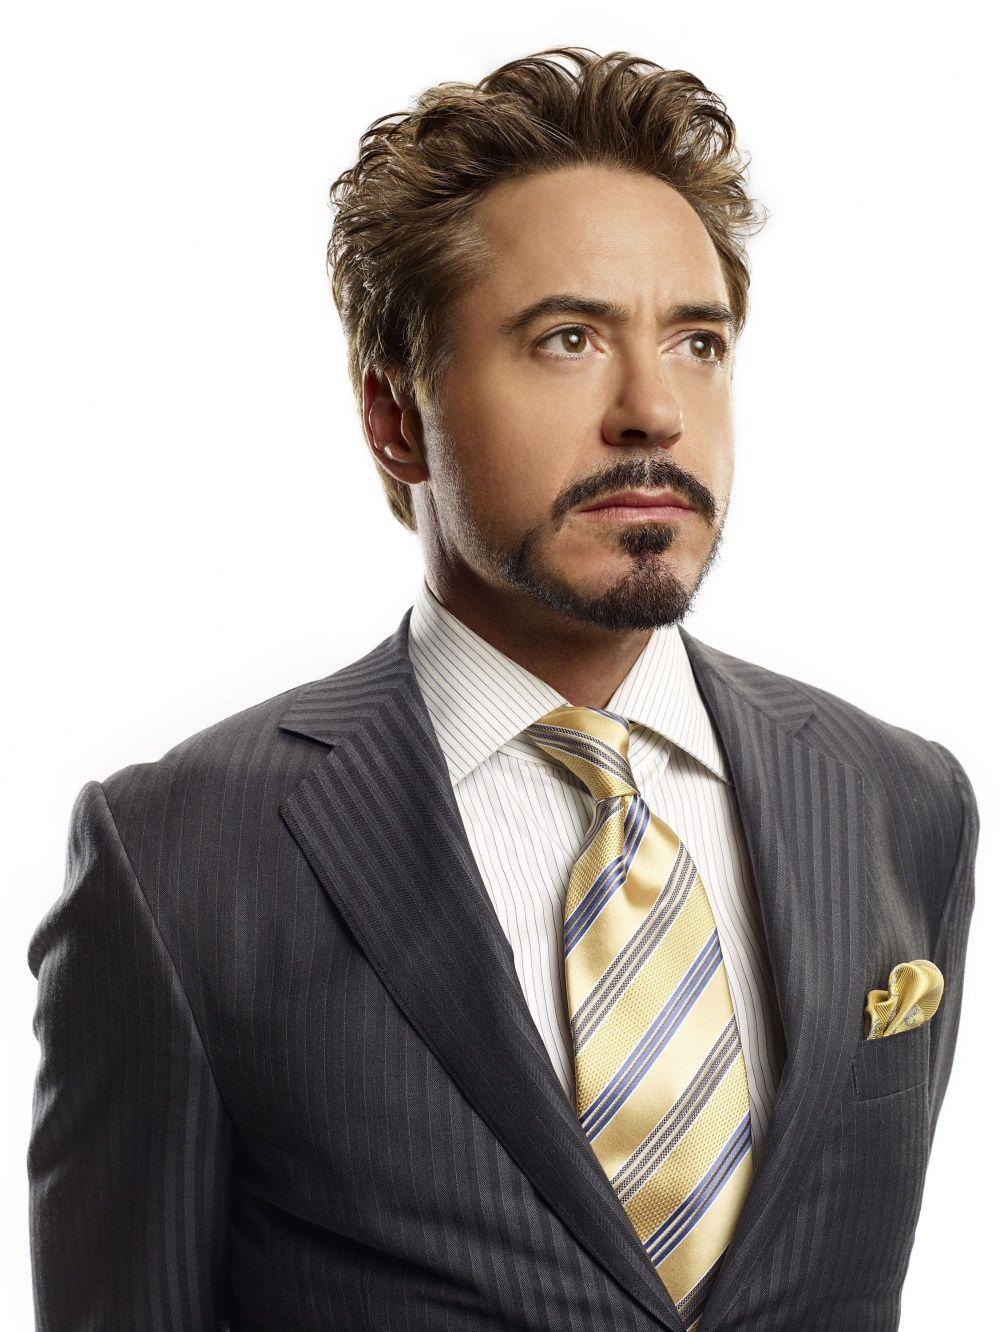 Mon 3 Aug 2015 Tony Stark HD Background for PC ⇔ Full HDQ Picture